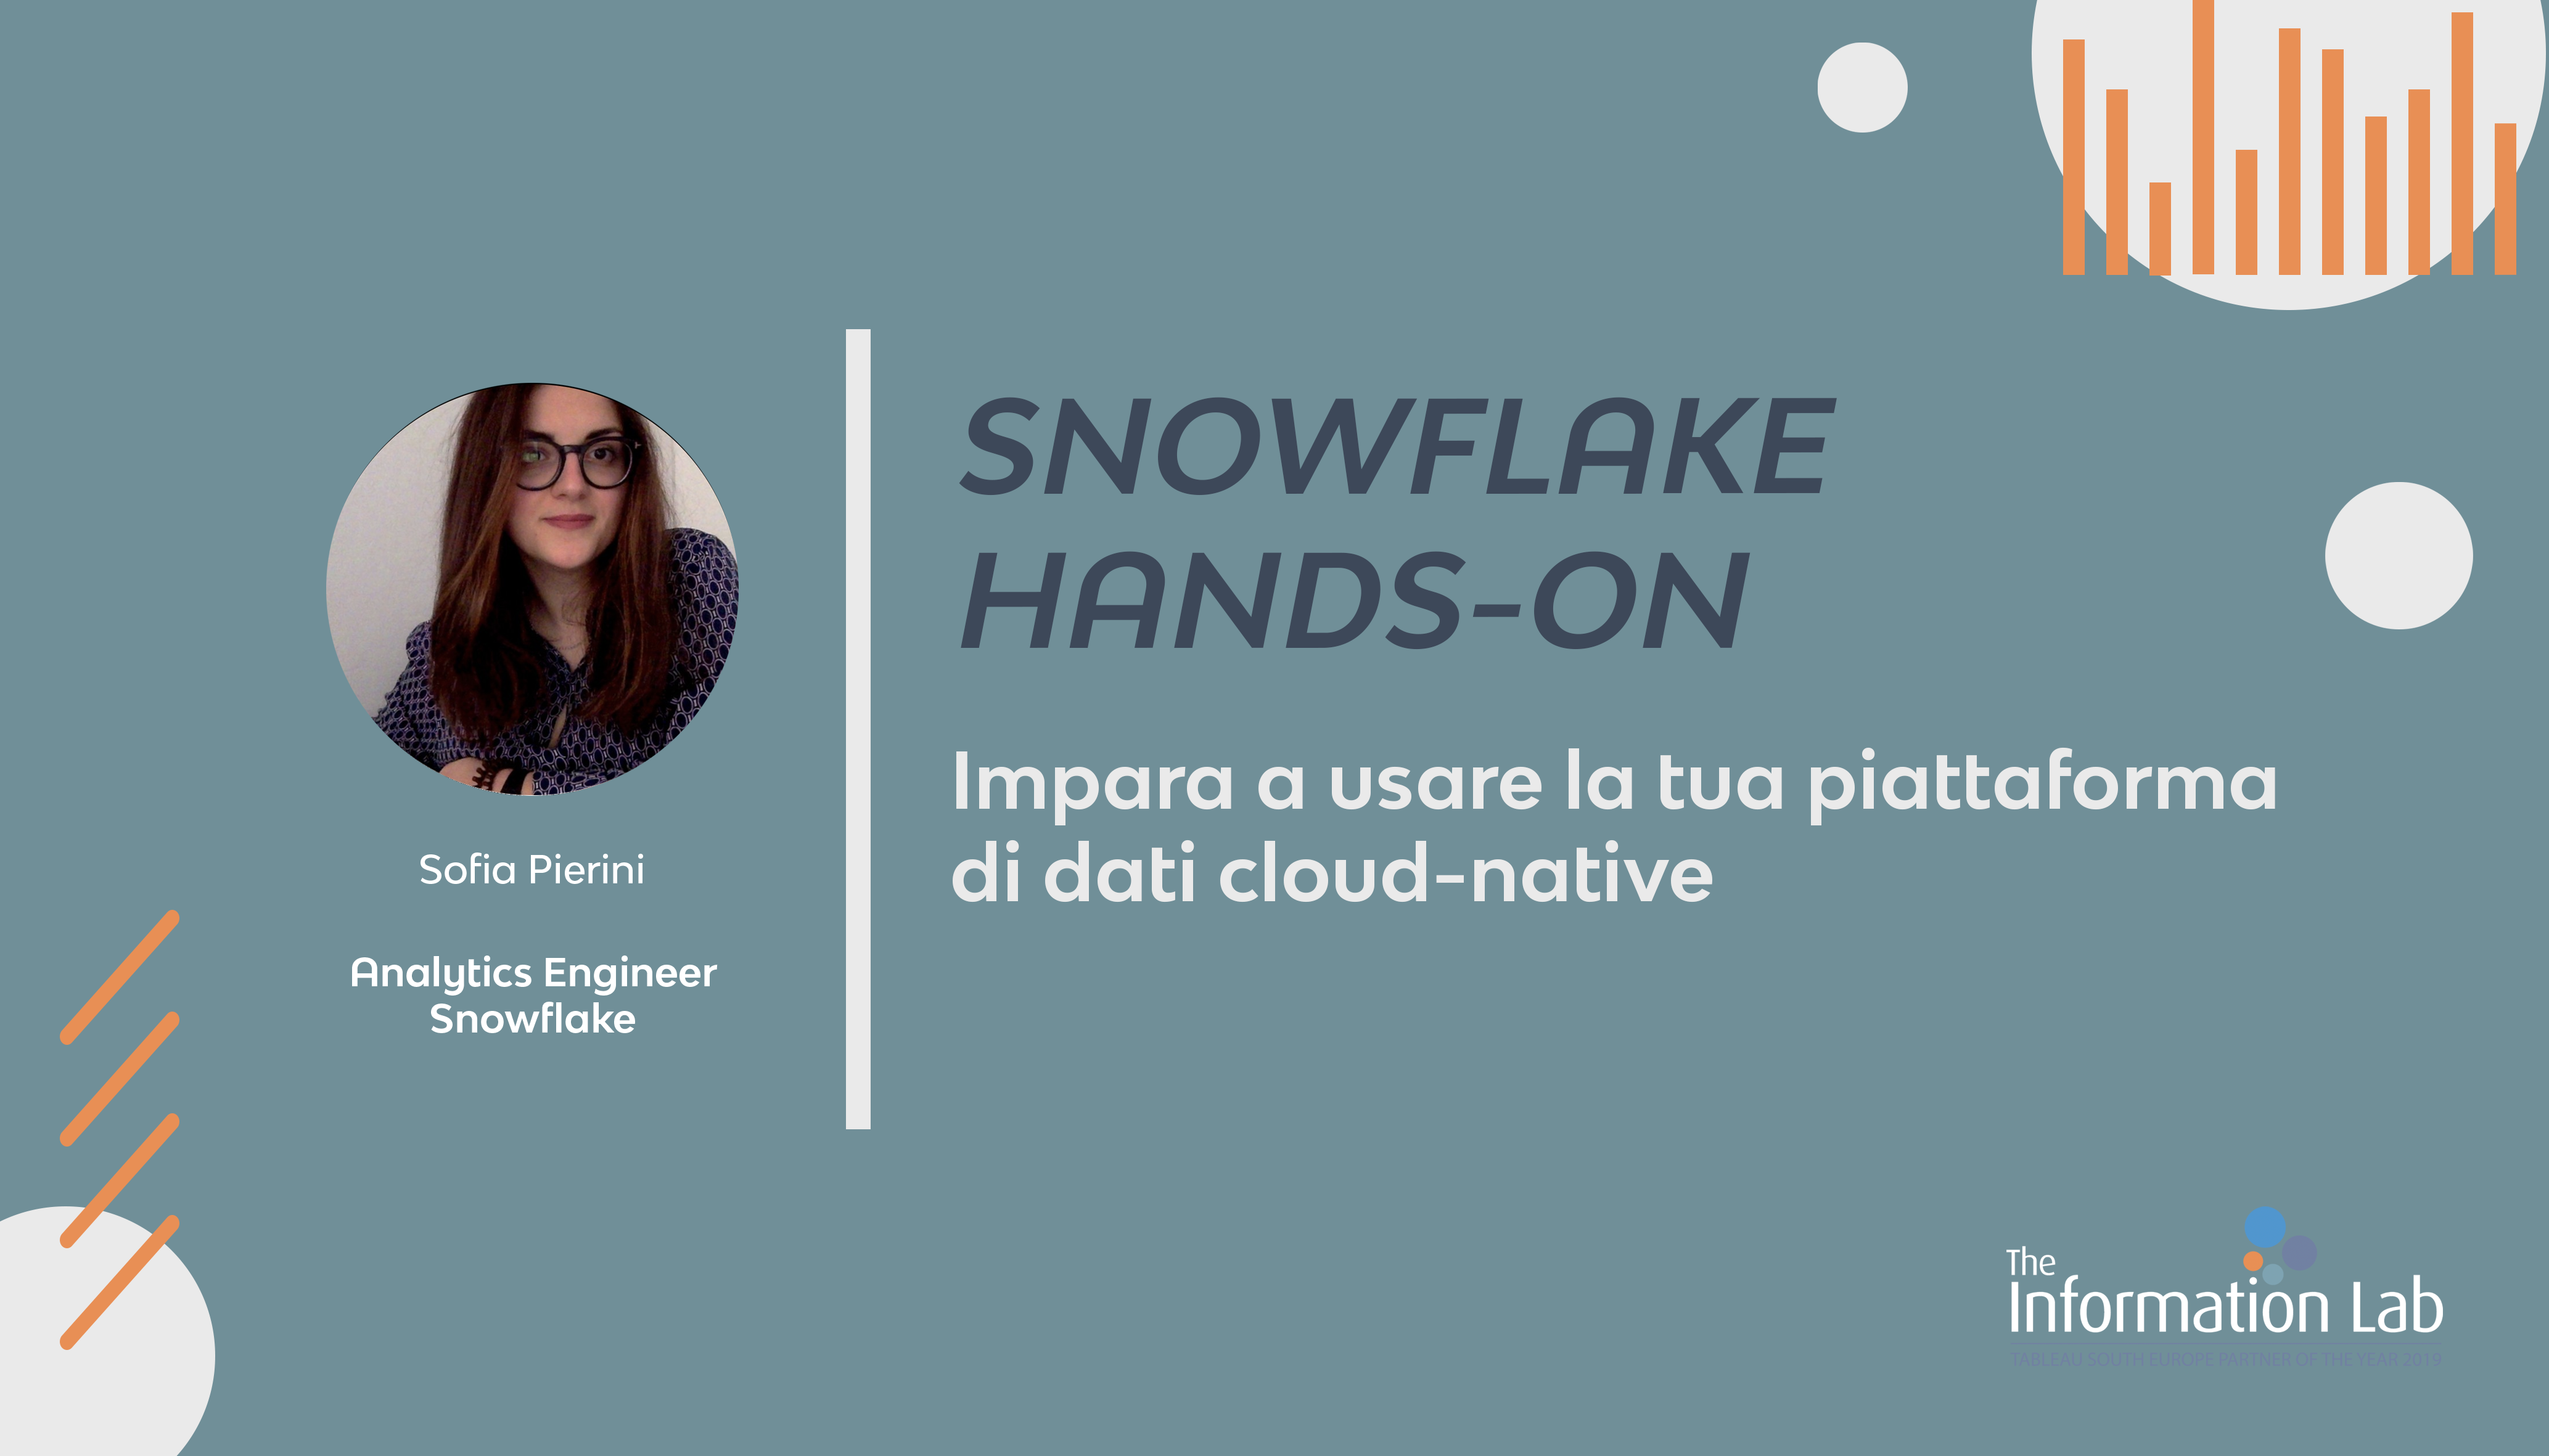 Snowflake | Hands-on